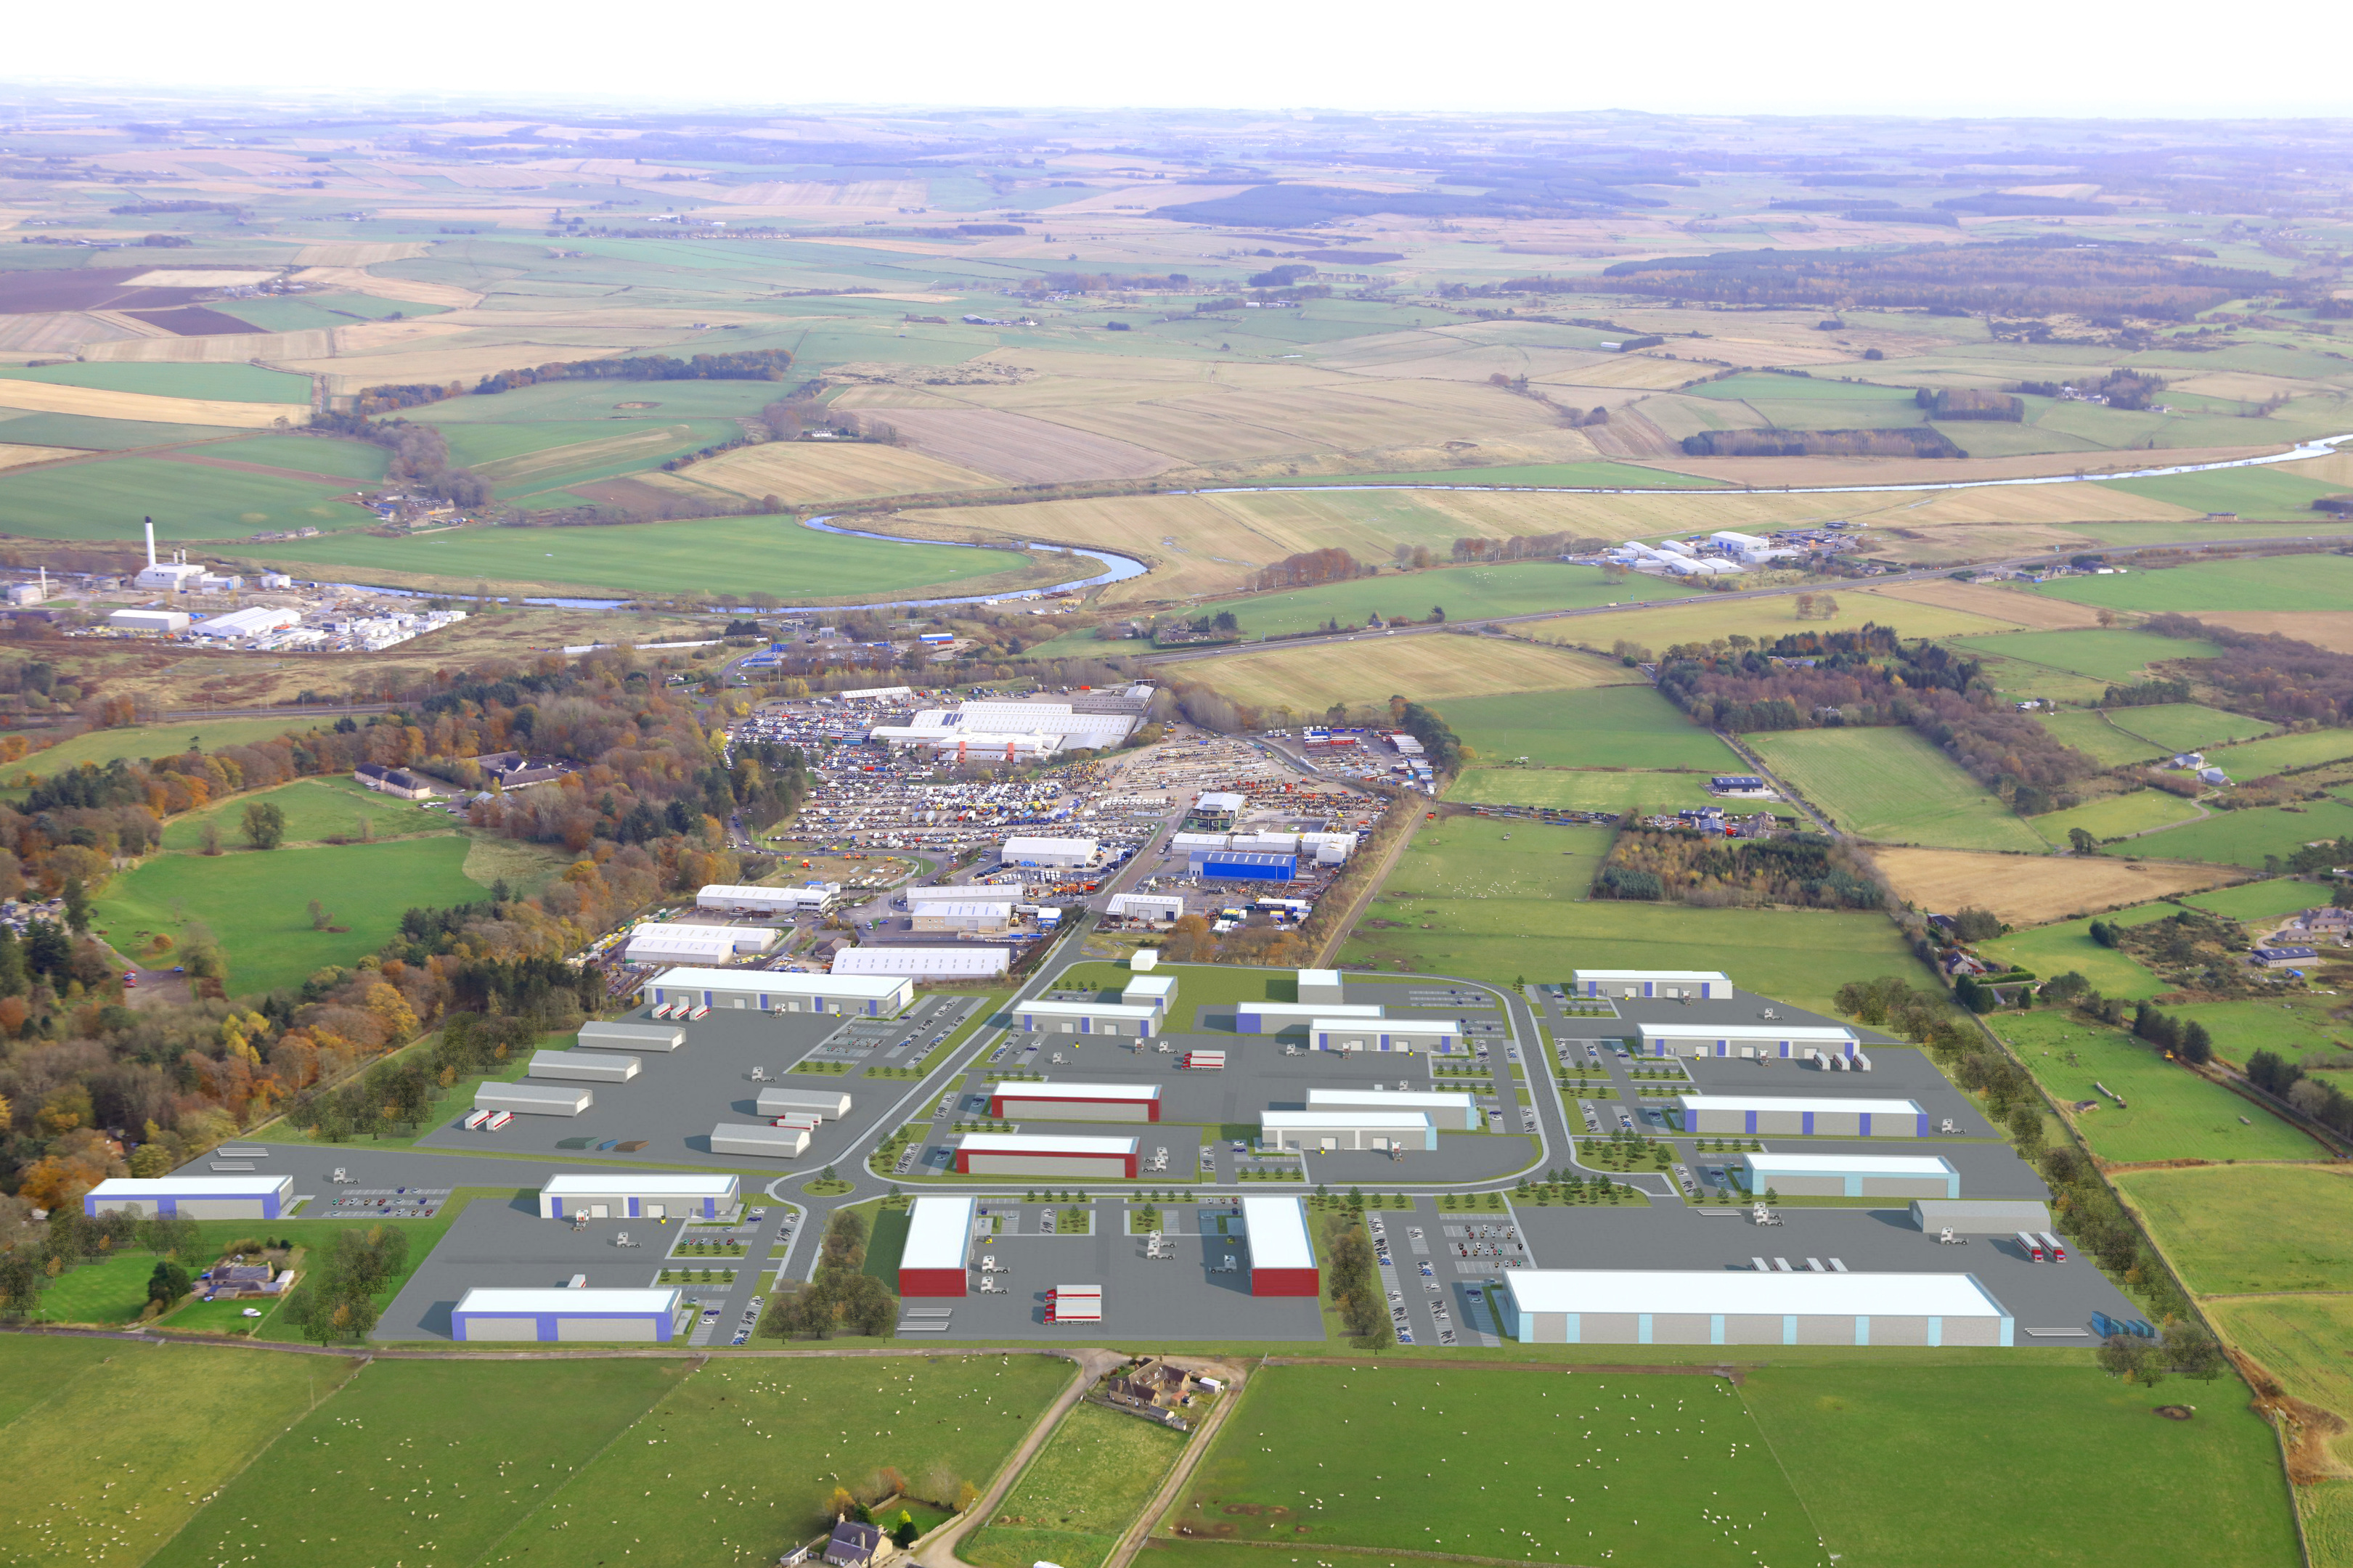 How the expanded Thainstone Business Park will look